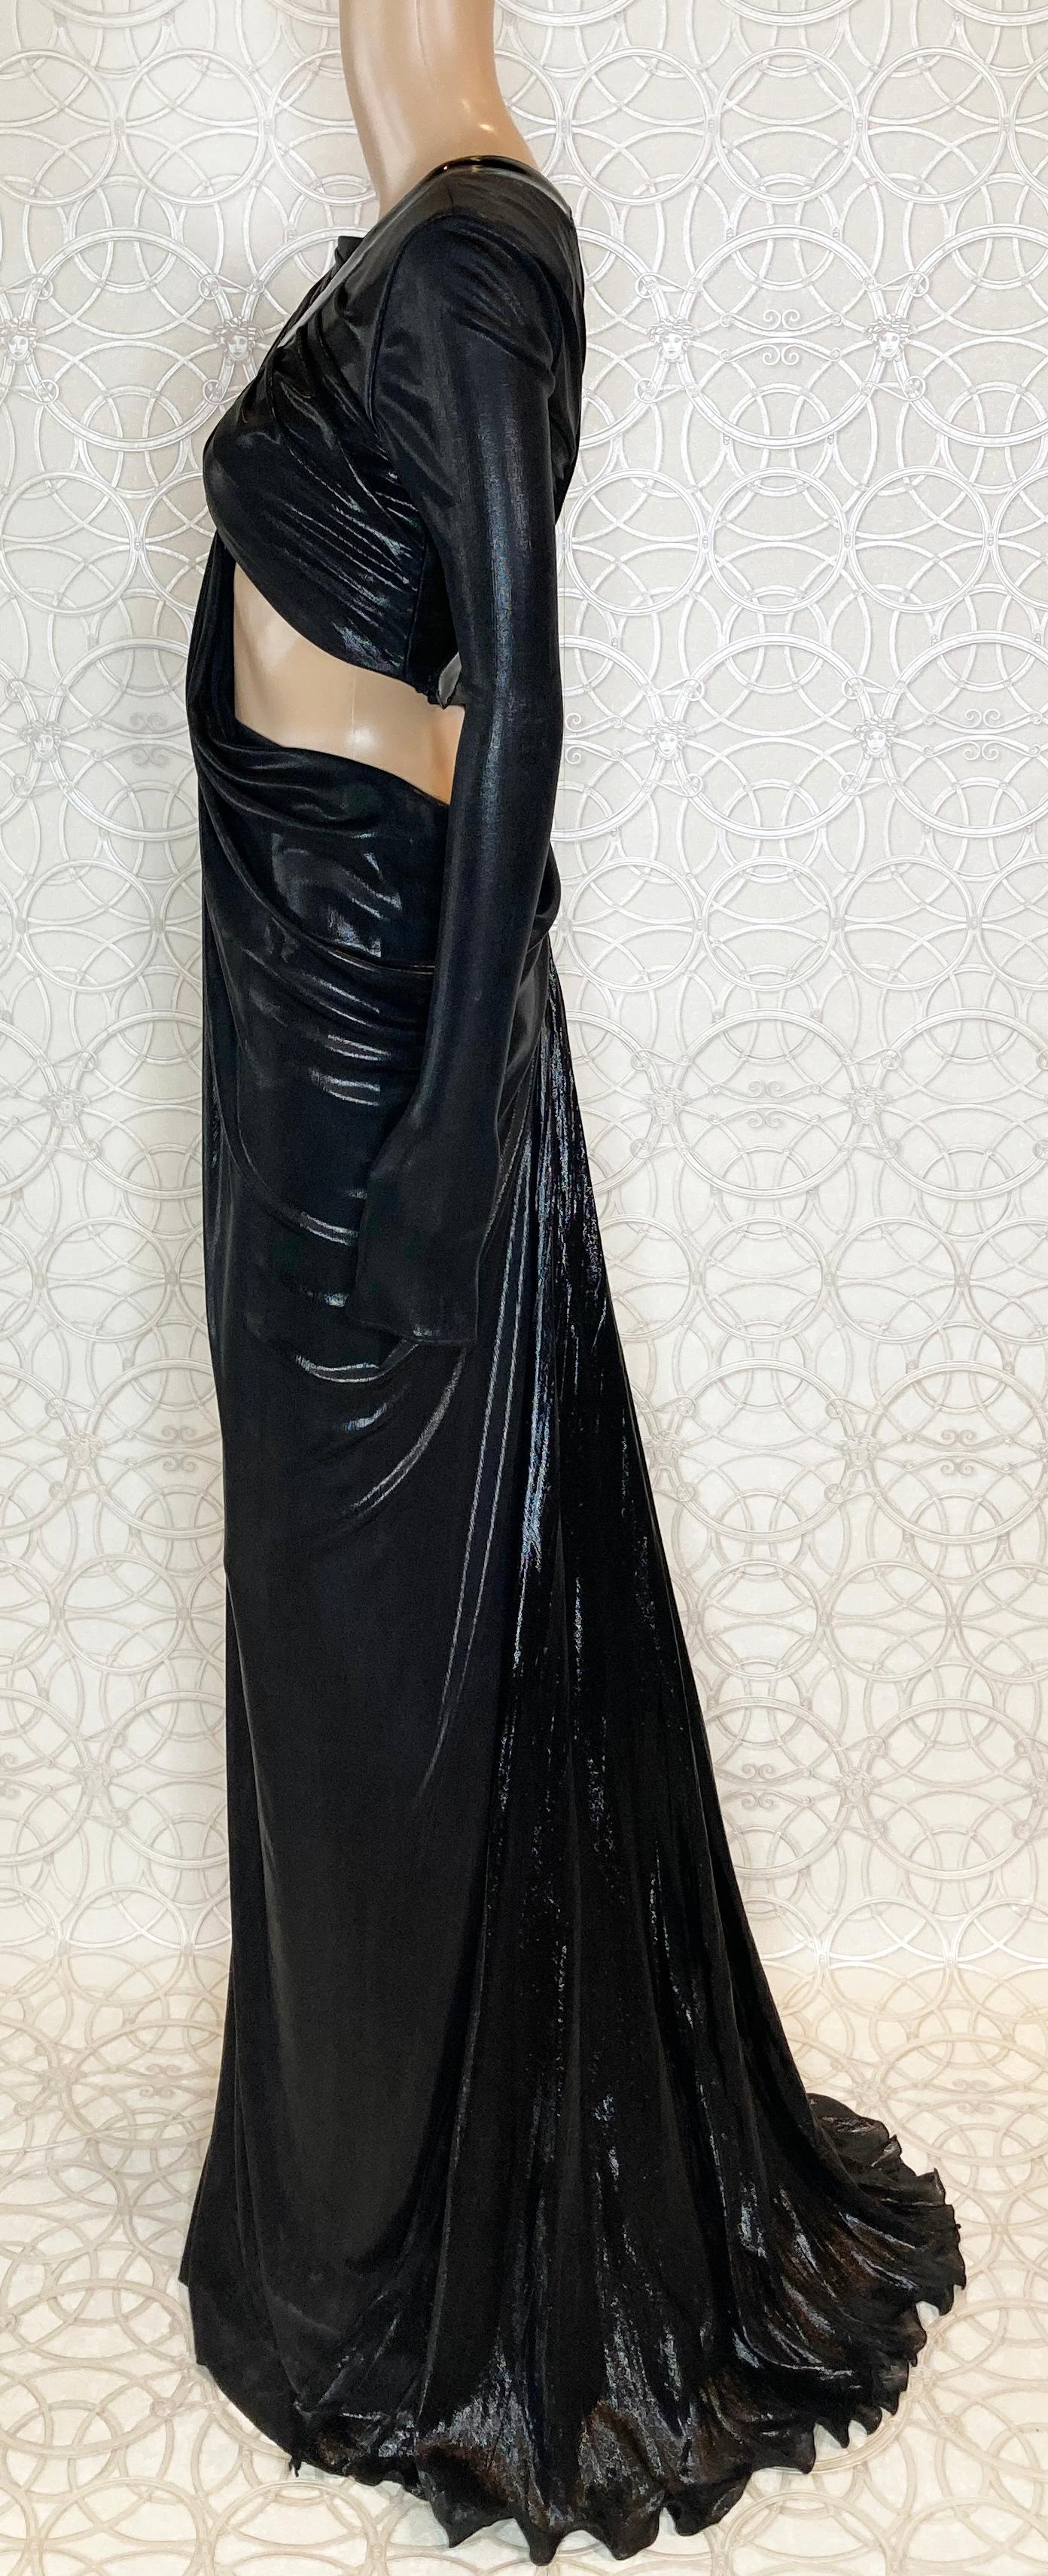 New VERSACE Hottest Black Liquid Jersey Gown With Vinyl Sleeves 3